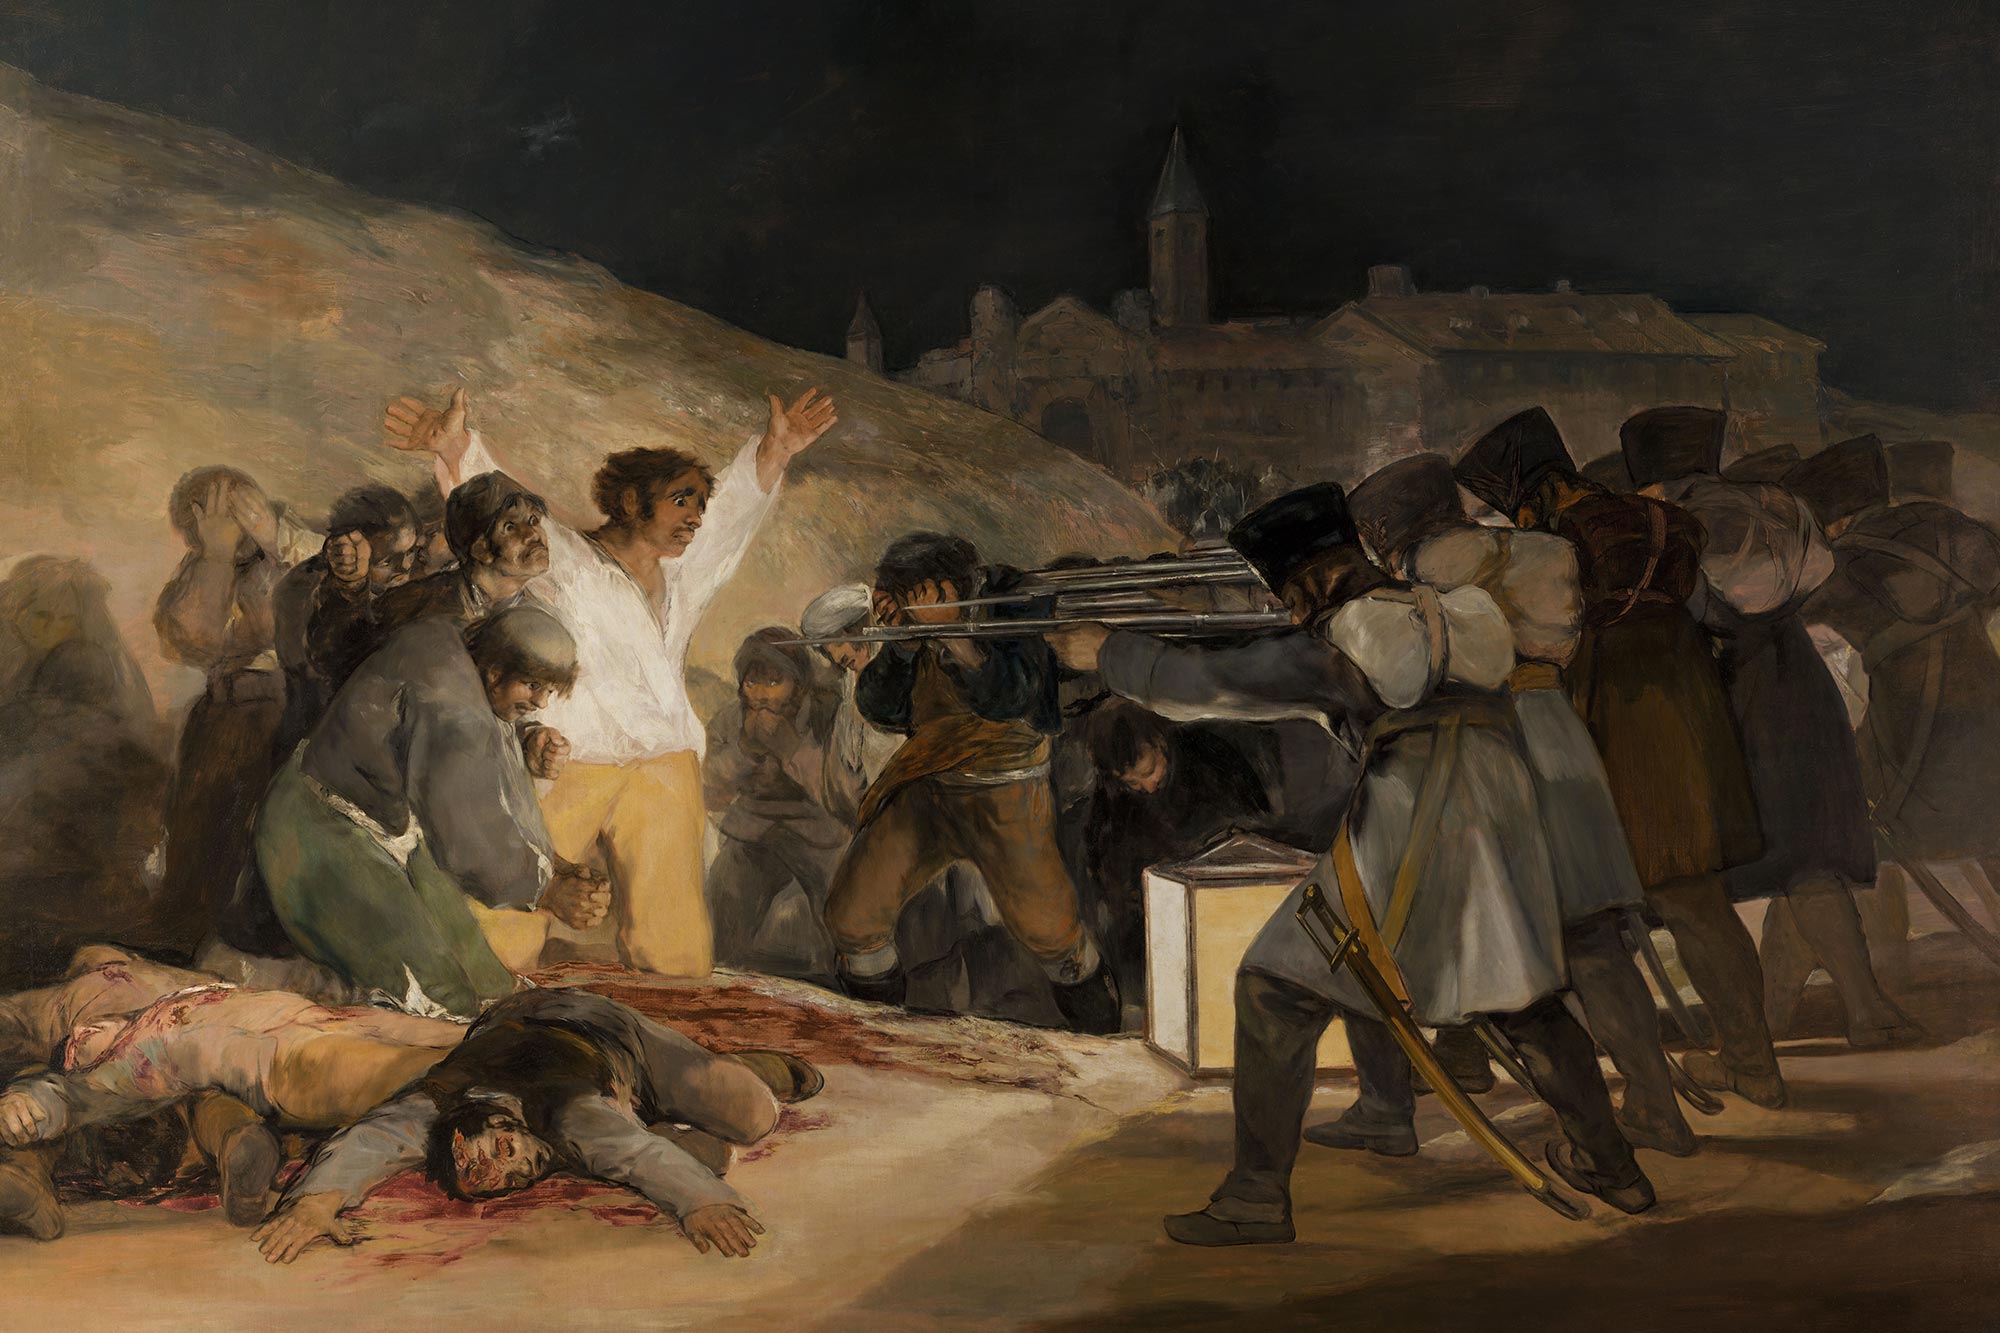 A painting of soldiers aiming guns at a group of people